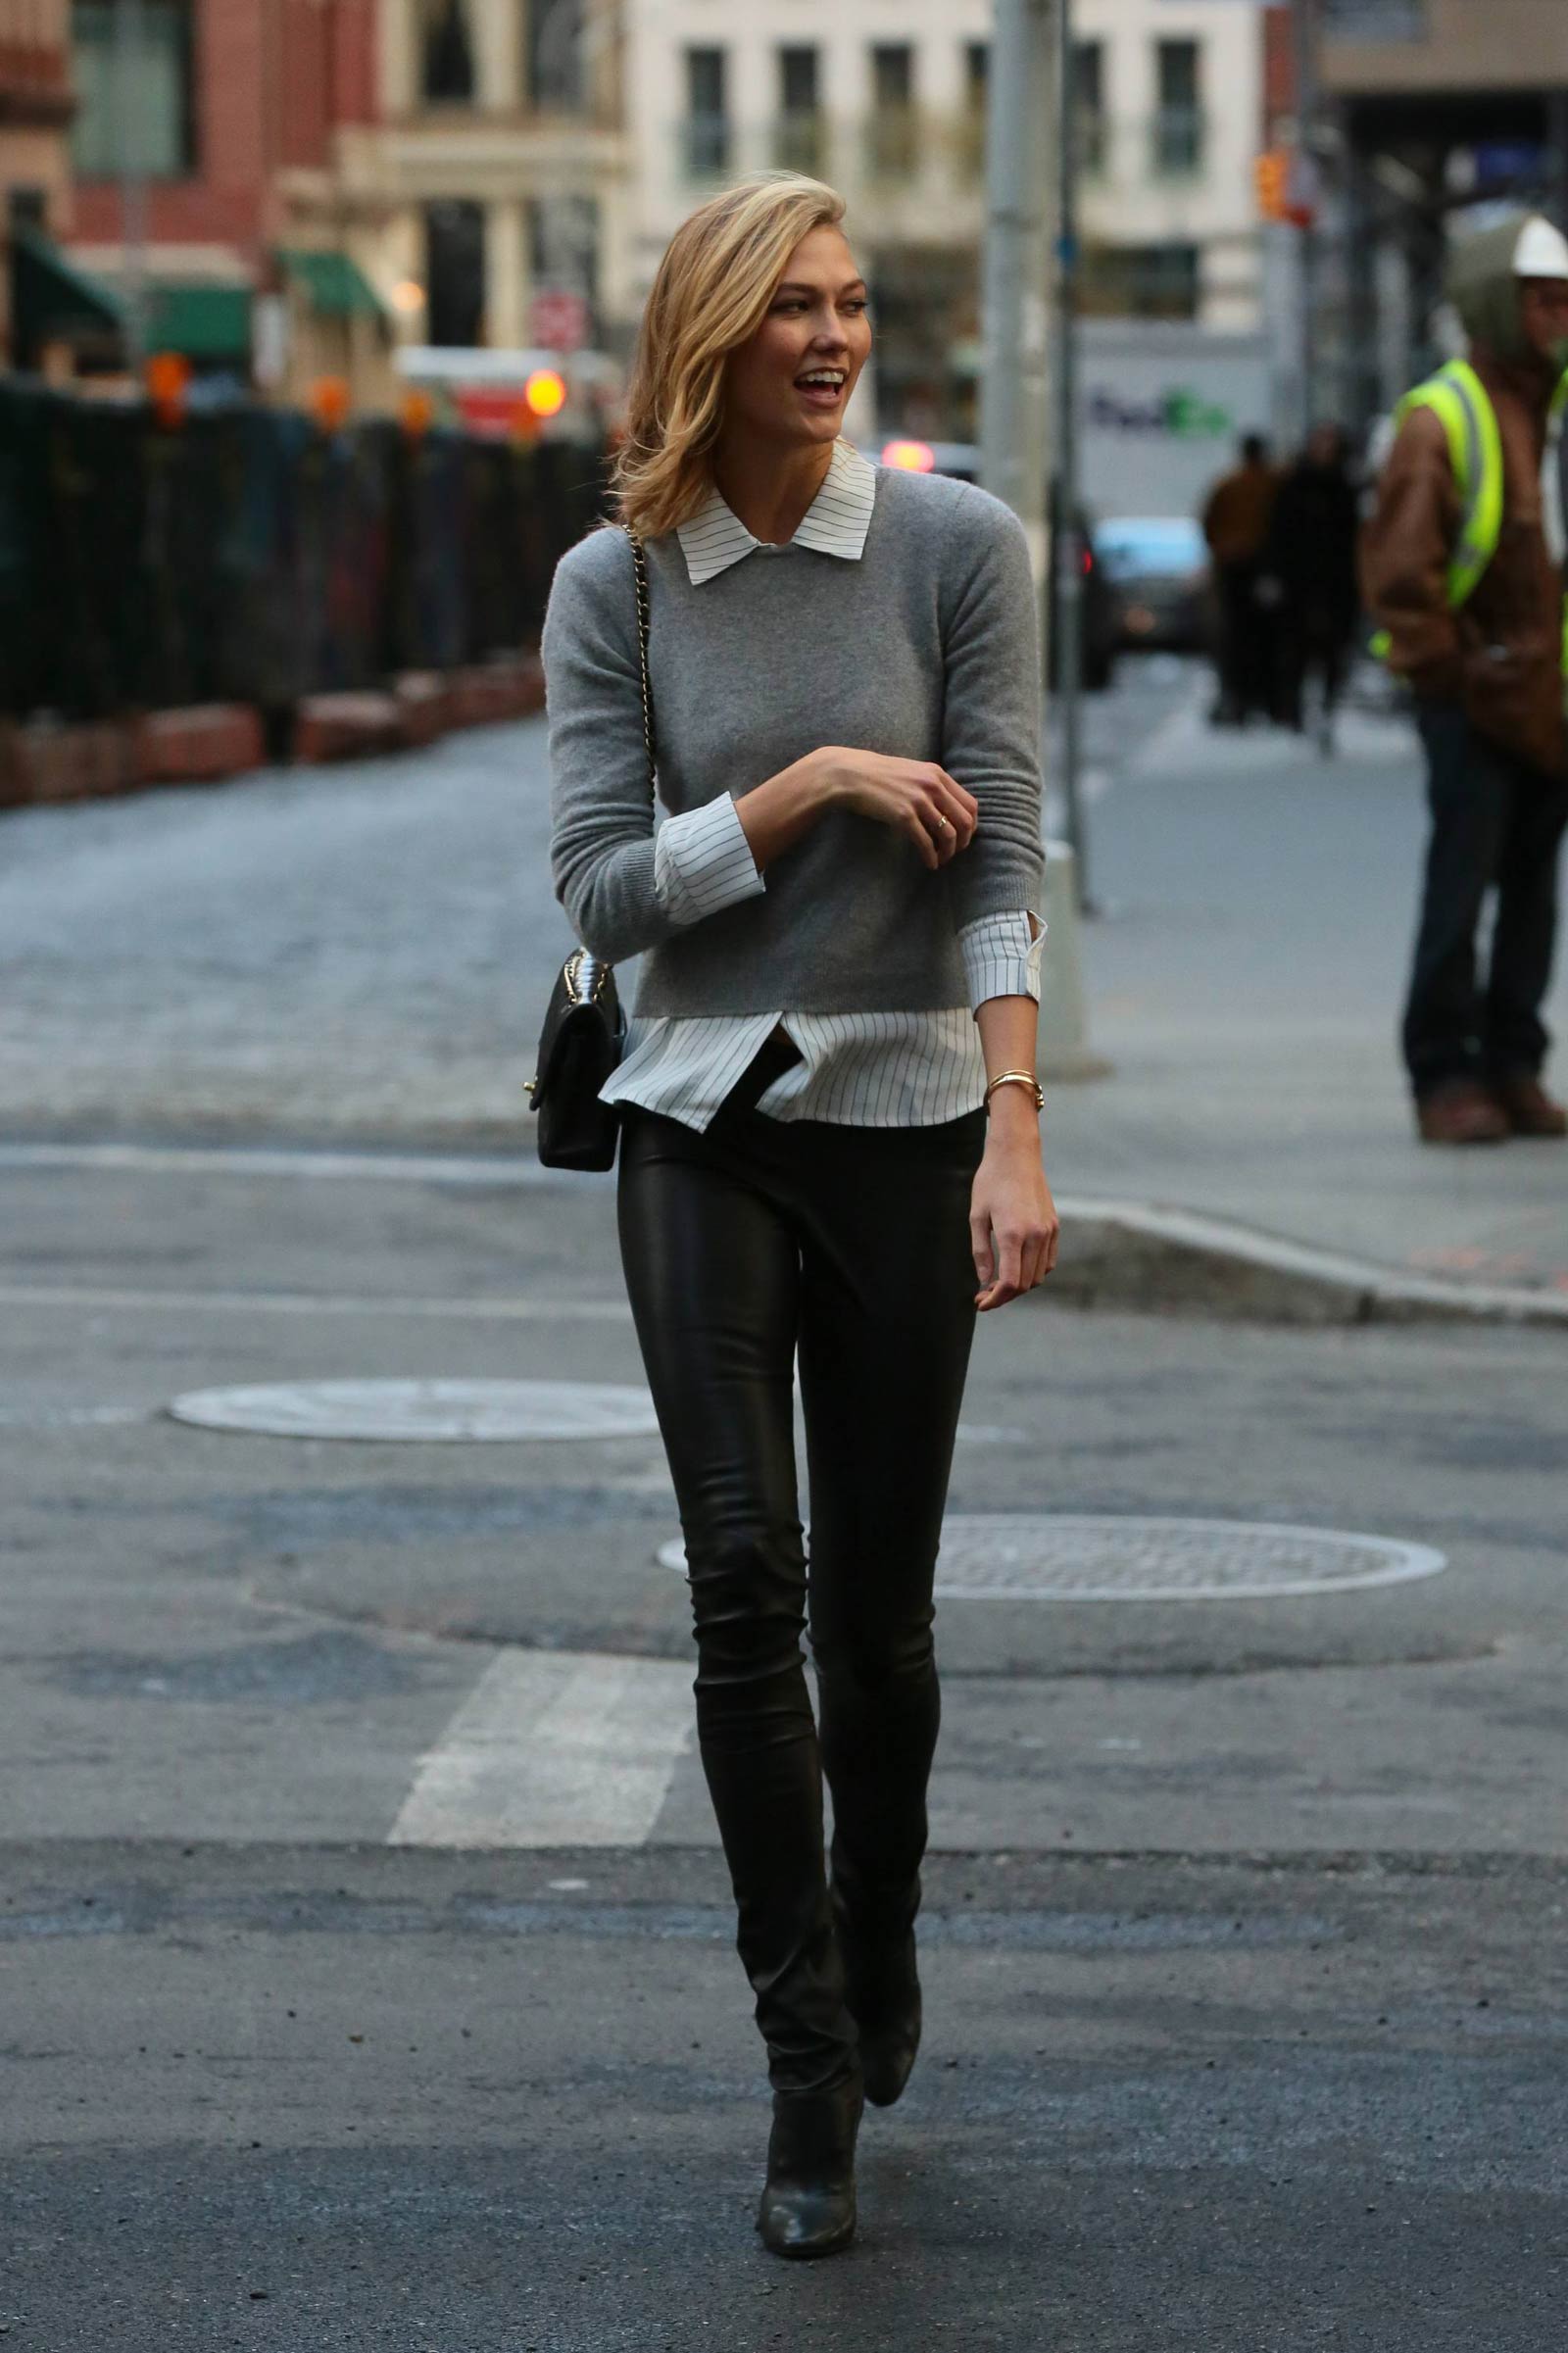 Karlie Kloss is spotted out for a stroll in New York City